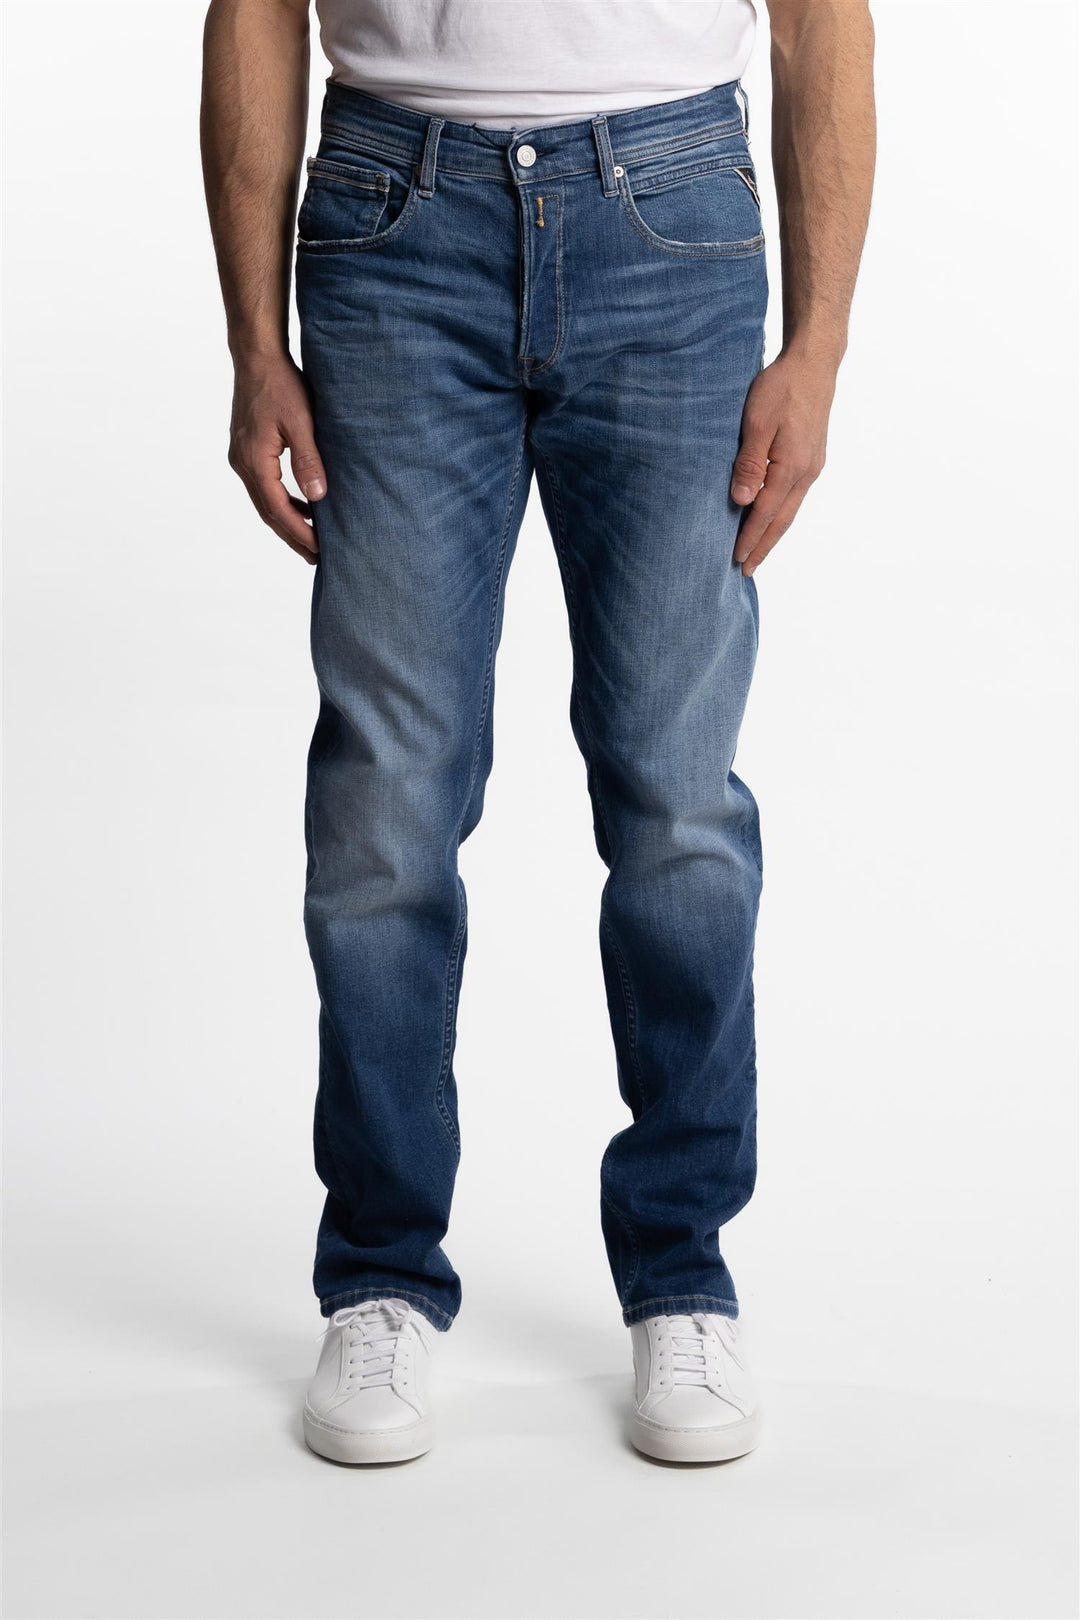 Grover Straight Fit Jeans Bio Light Blue